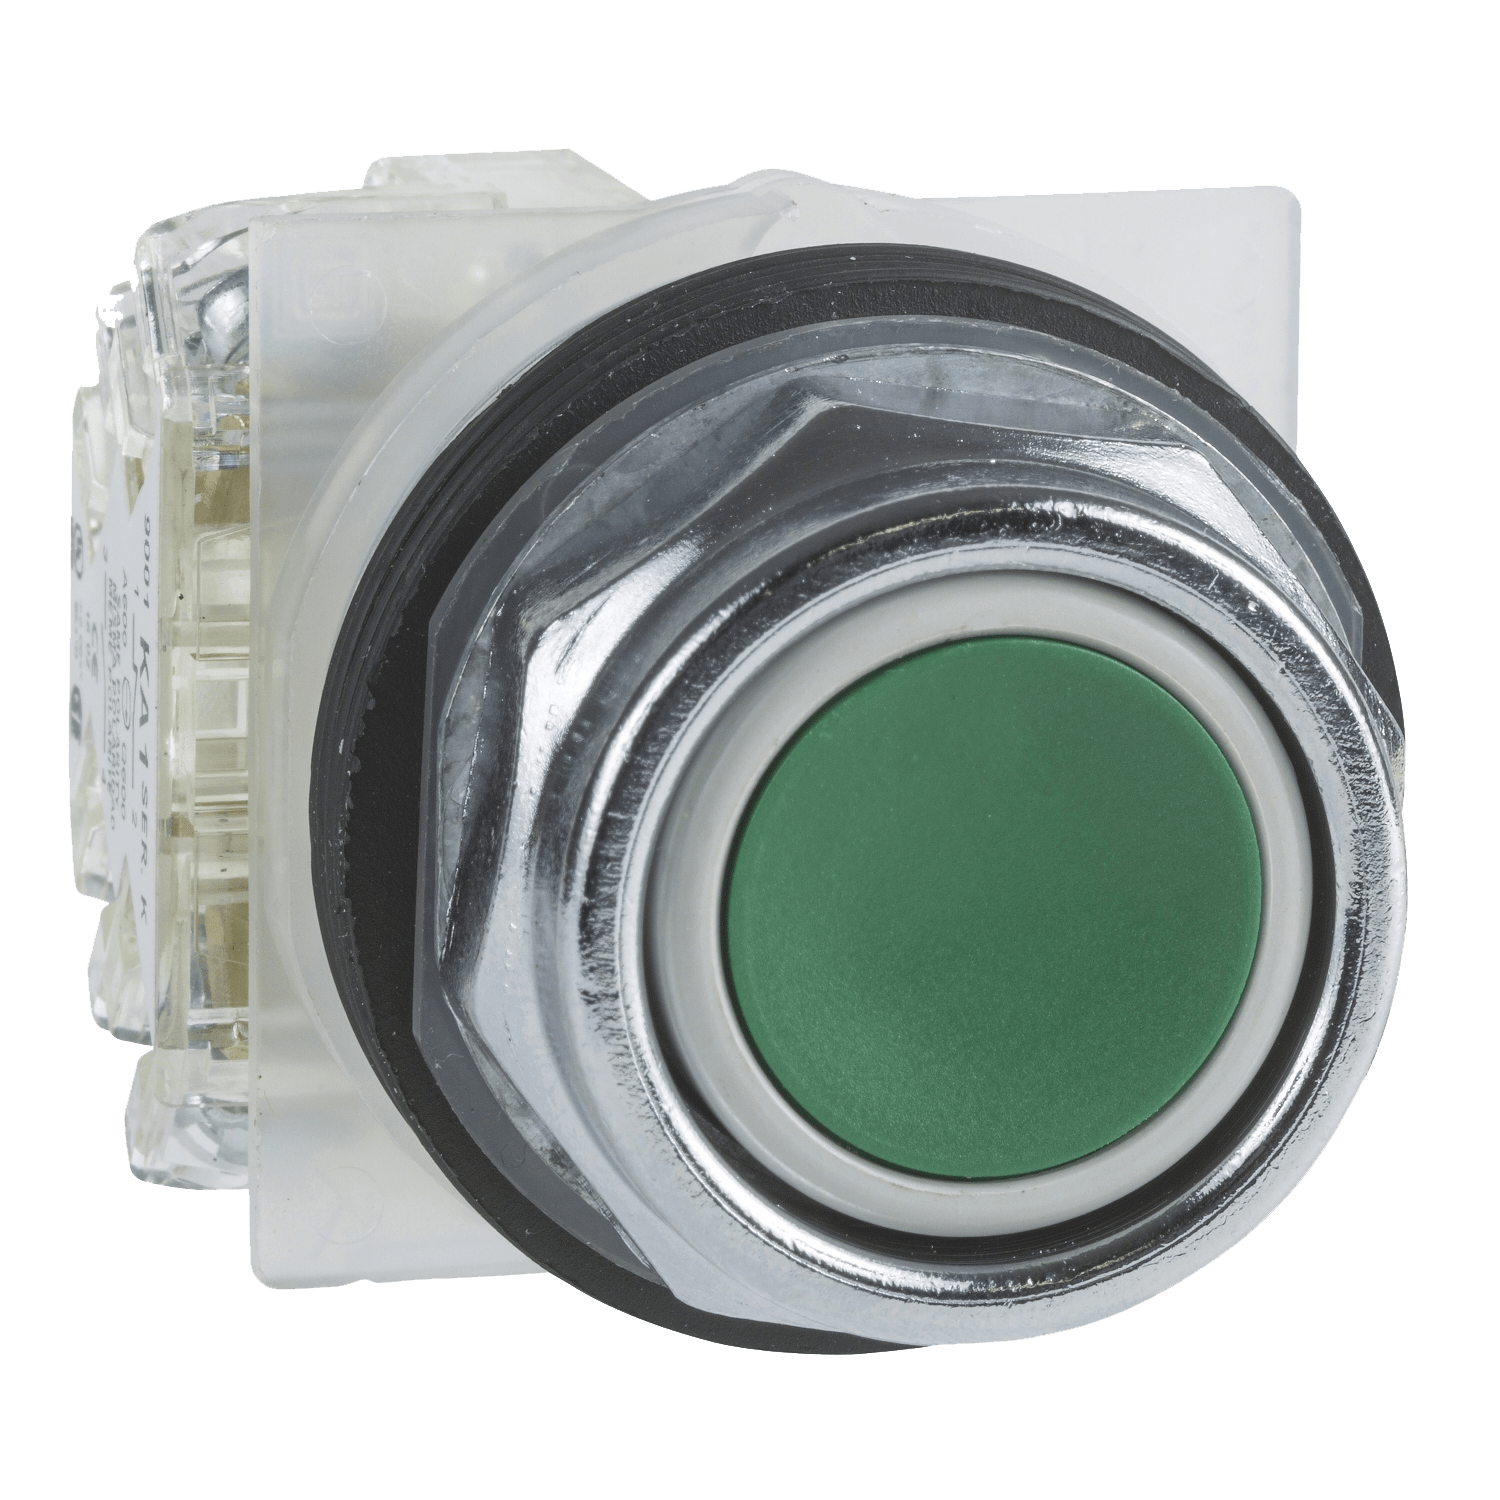 Harmony 30mm Pushbutton by Schneider Electric